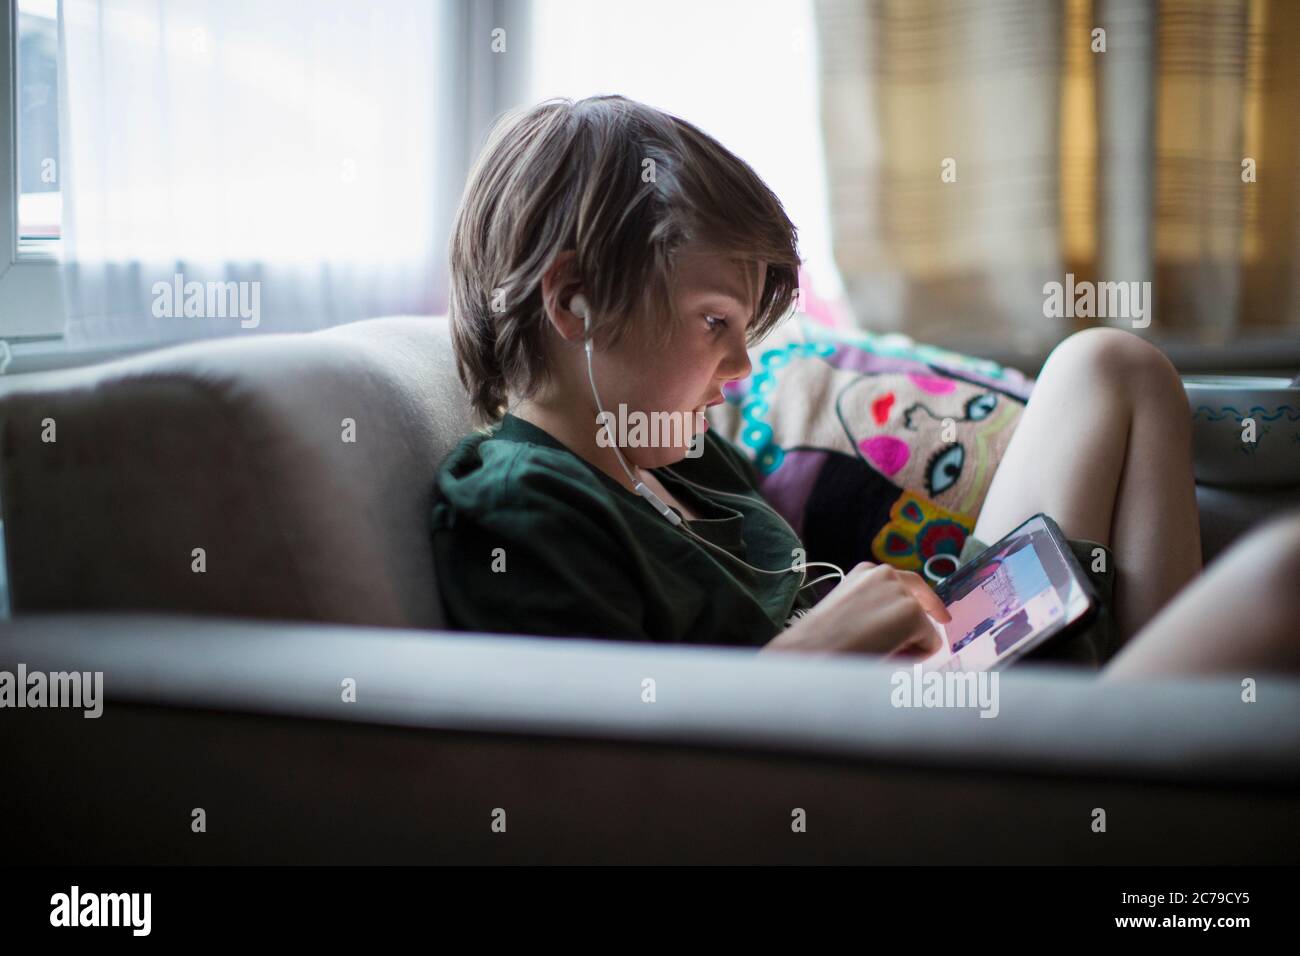 Boy with headphones using digital tablet in living room Stock Photo